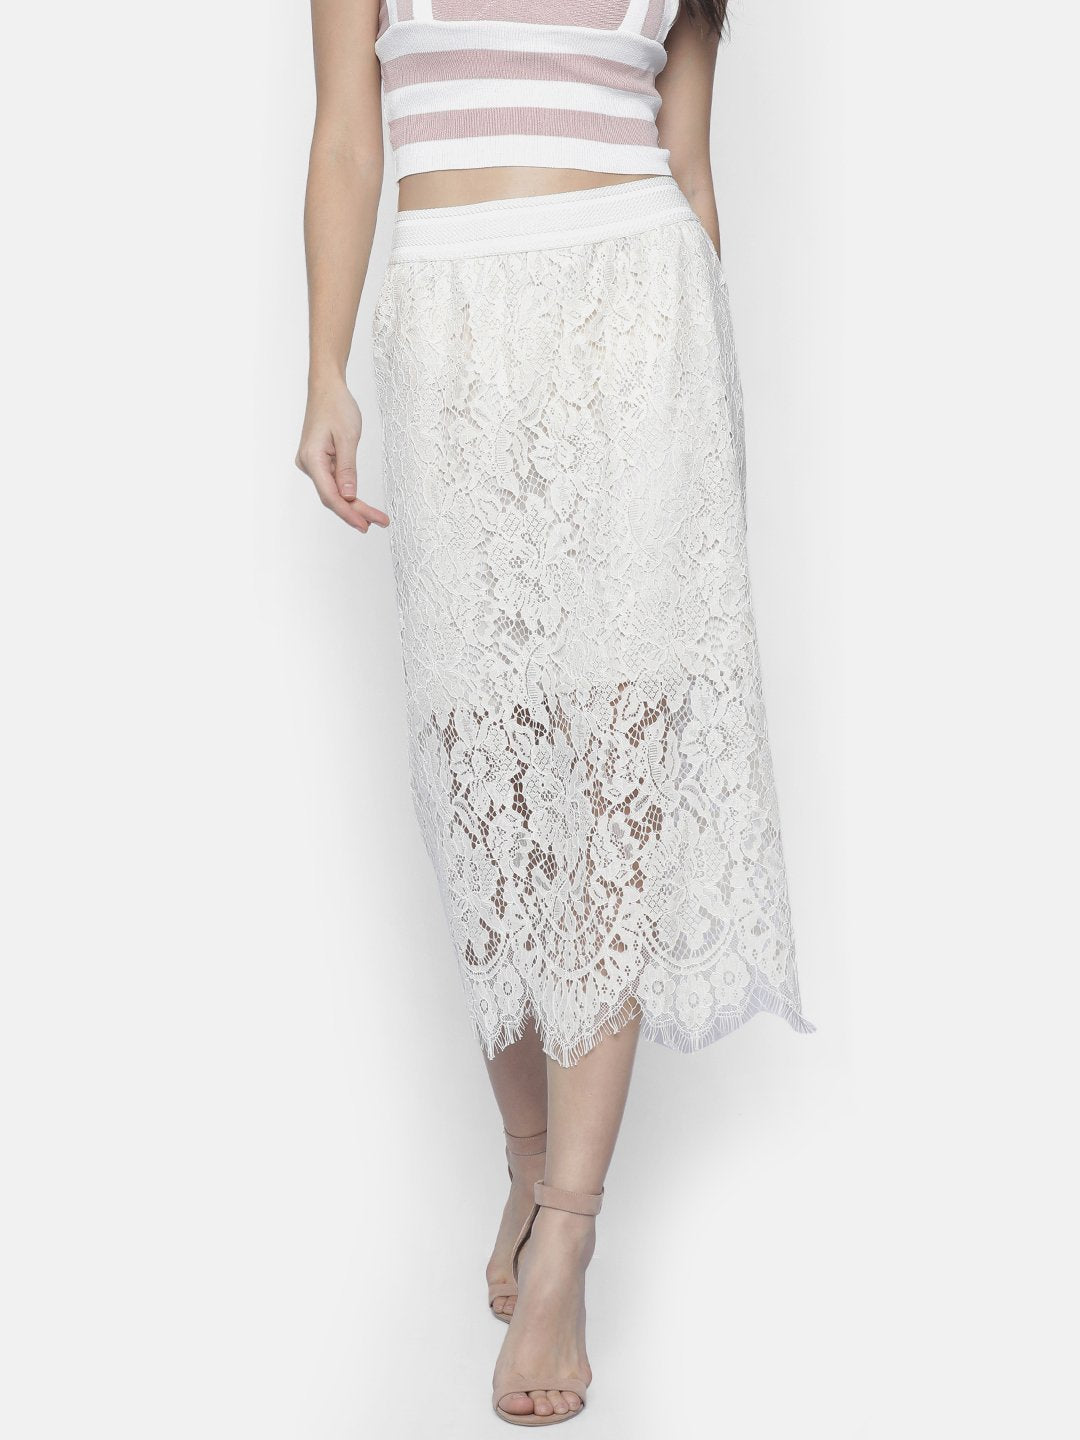 IS.U White Lace Skirt